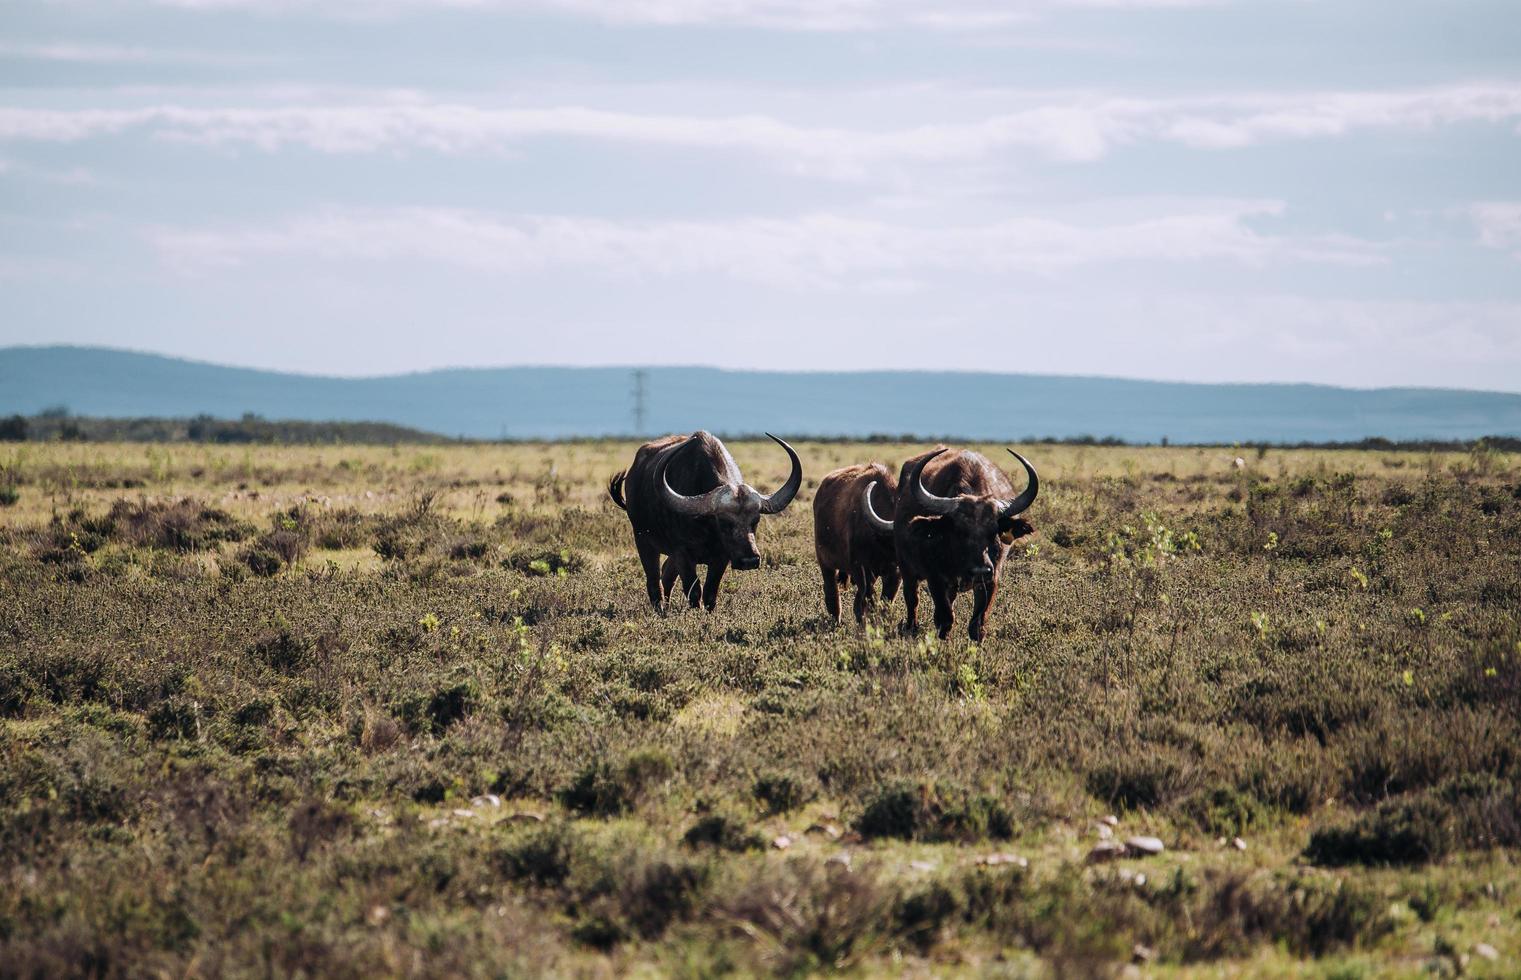 Cape Town, South Africa, 2020 - Water buffalo in field during the day photo